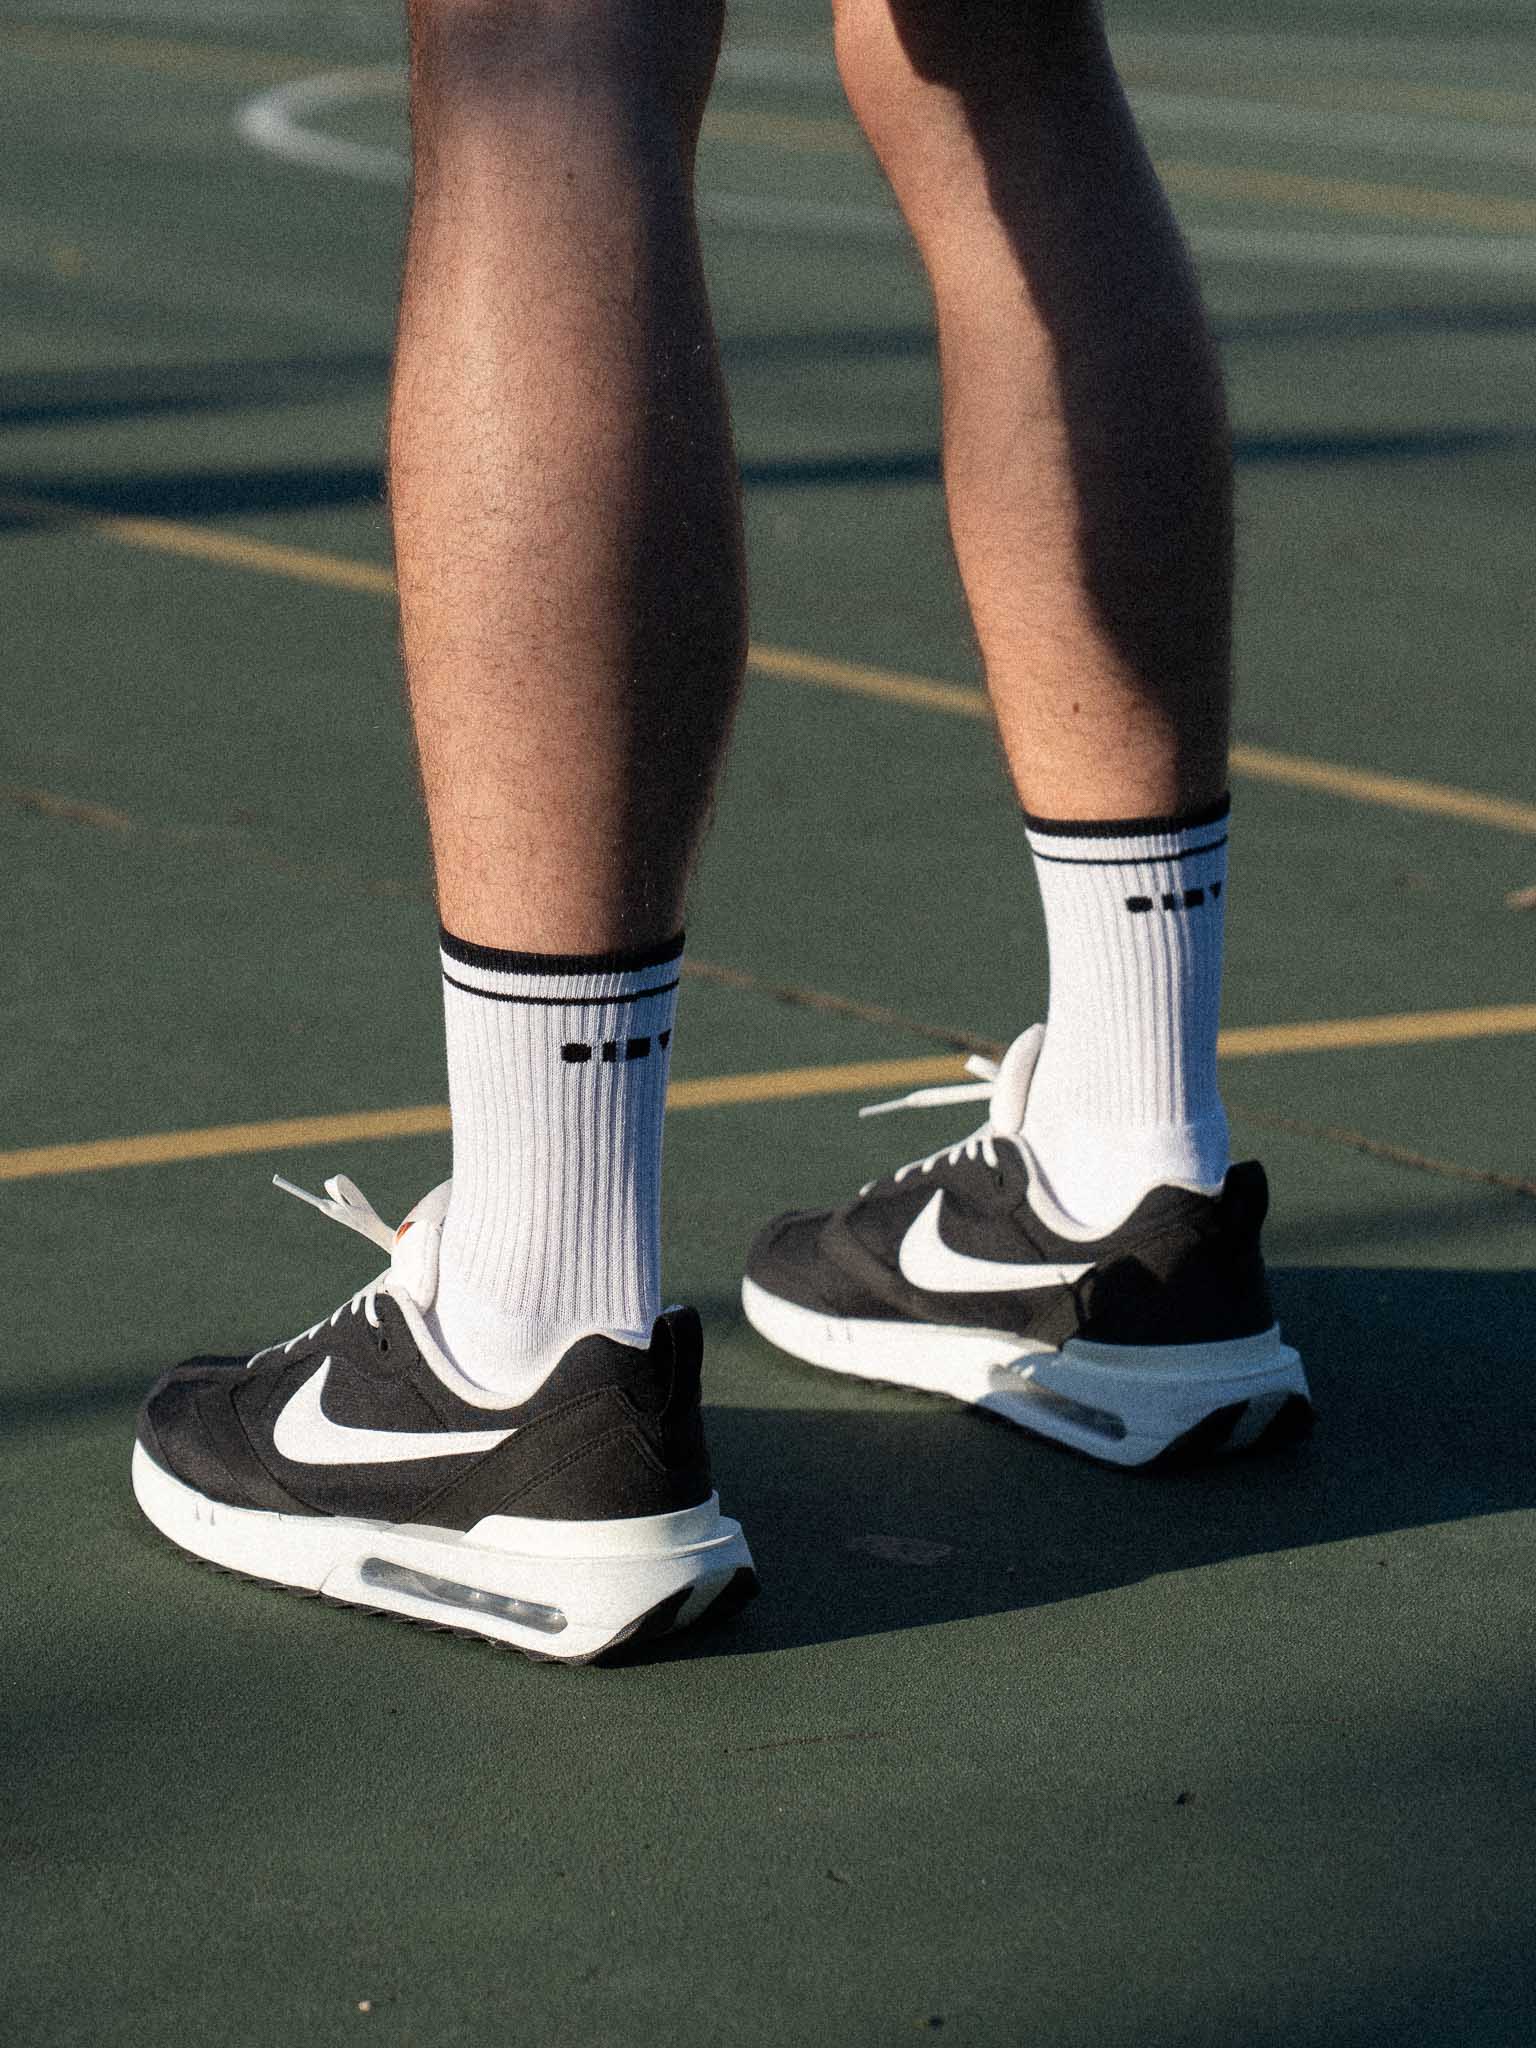 Clay Active men's tennis sock with Nike shoes on court.